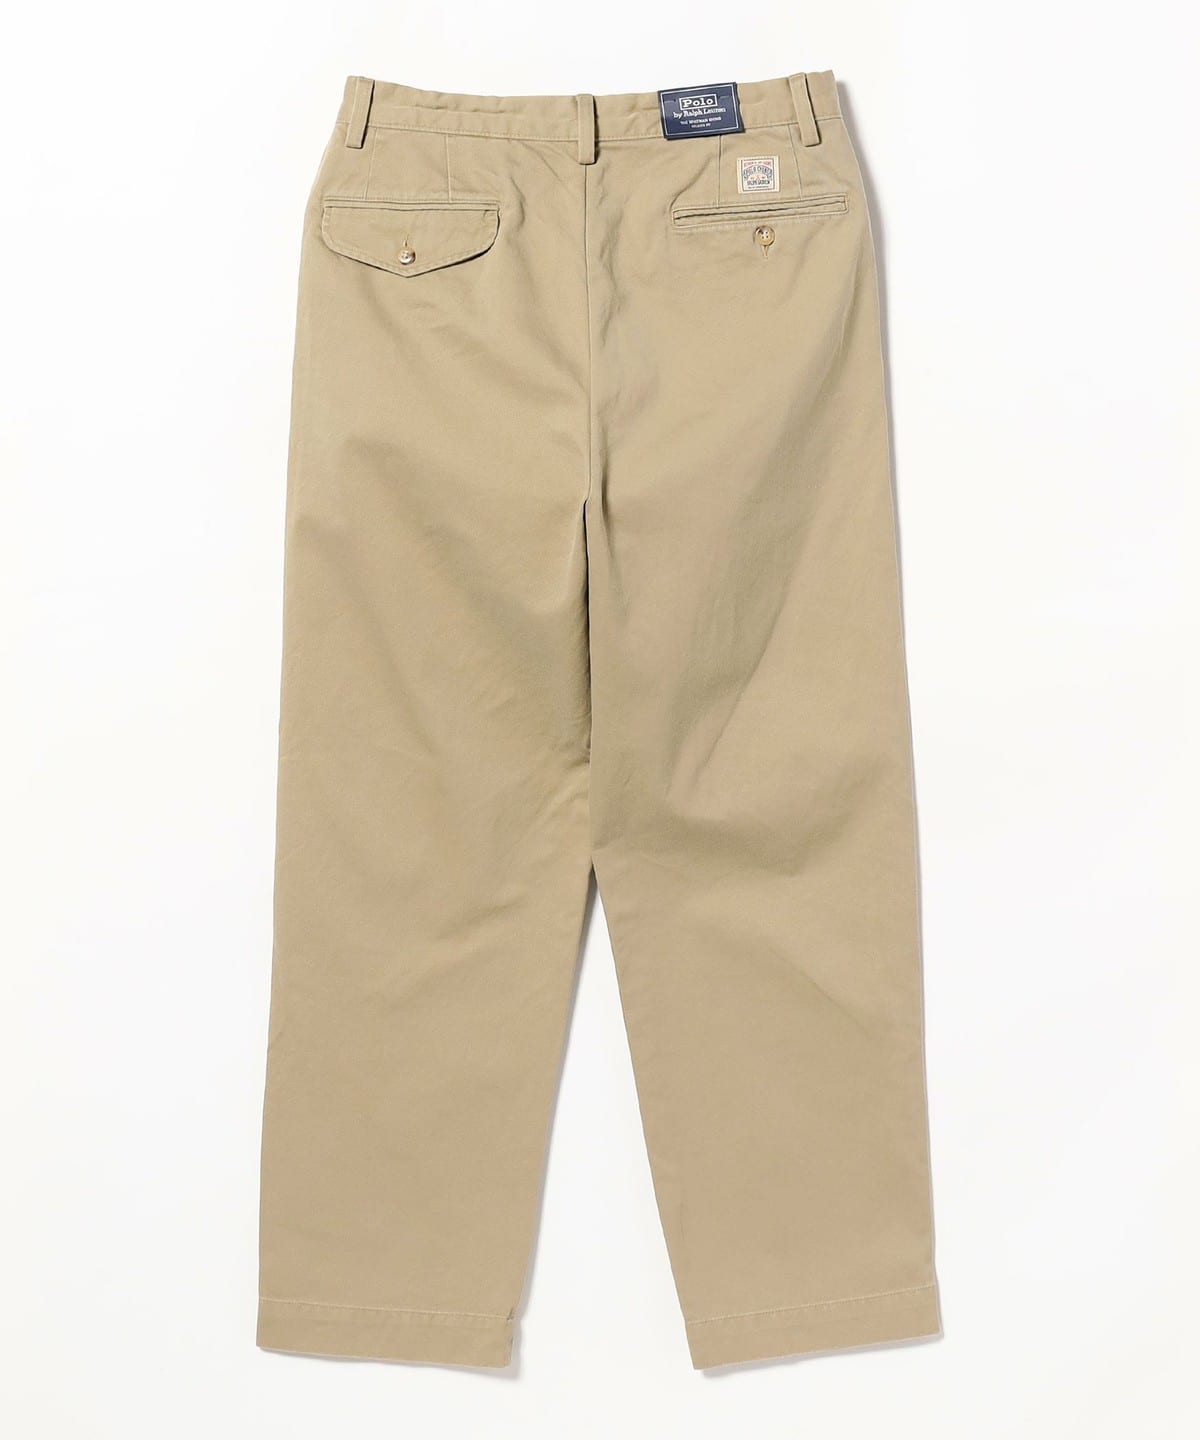 BEAMS POLO RALPH LAUREN / BEAMS Relaxed Fit Pleated Twill Pants 